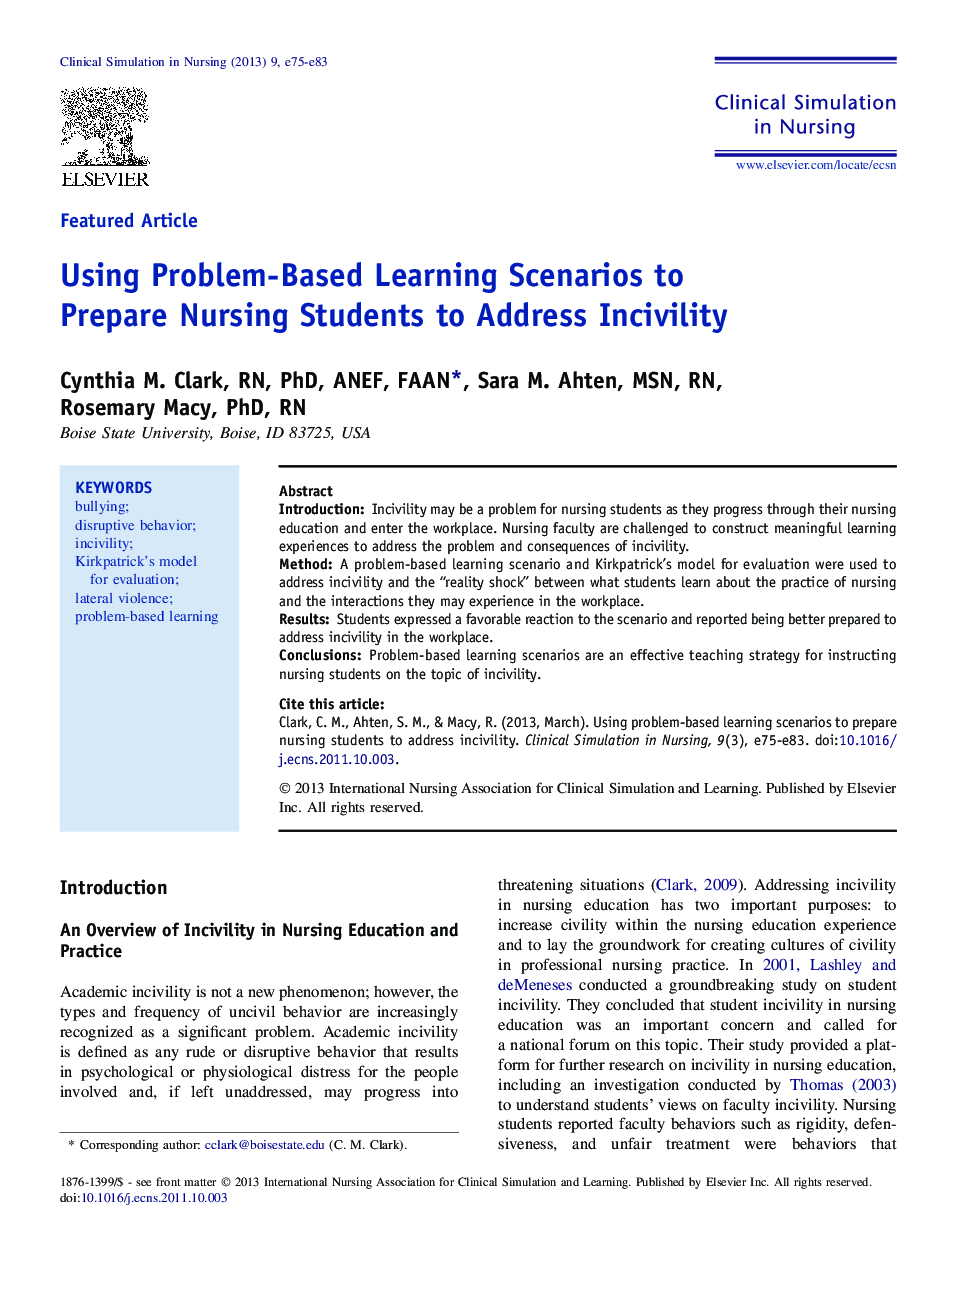 Using Problem-Based Learning Scenarios to Prepare Nursing Students to Address Incivility